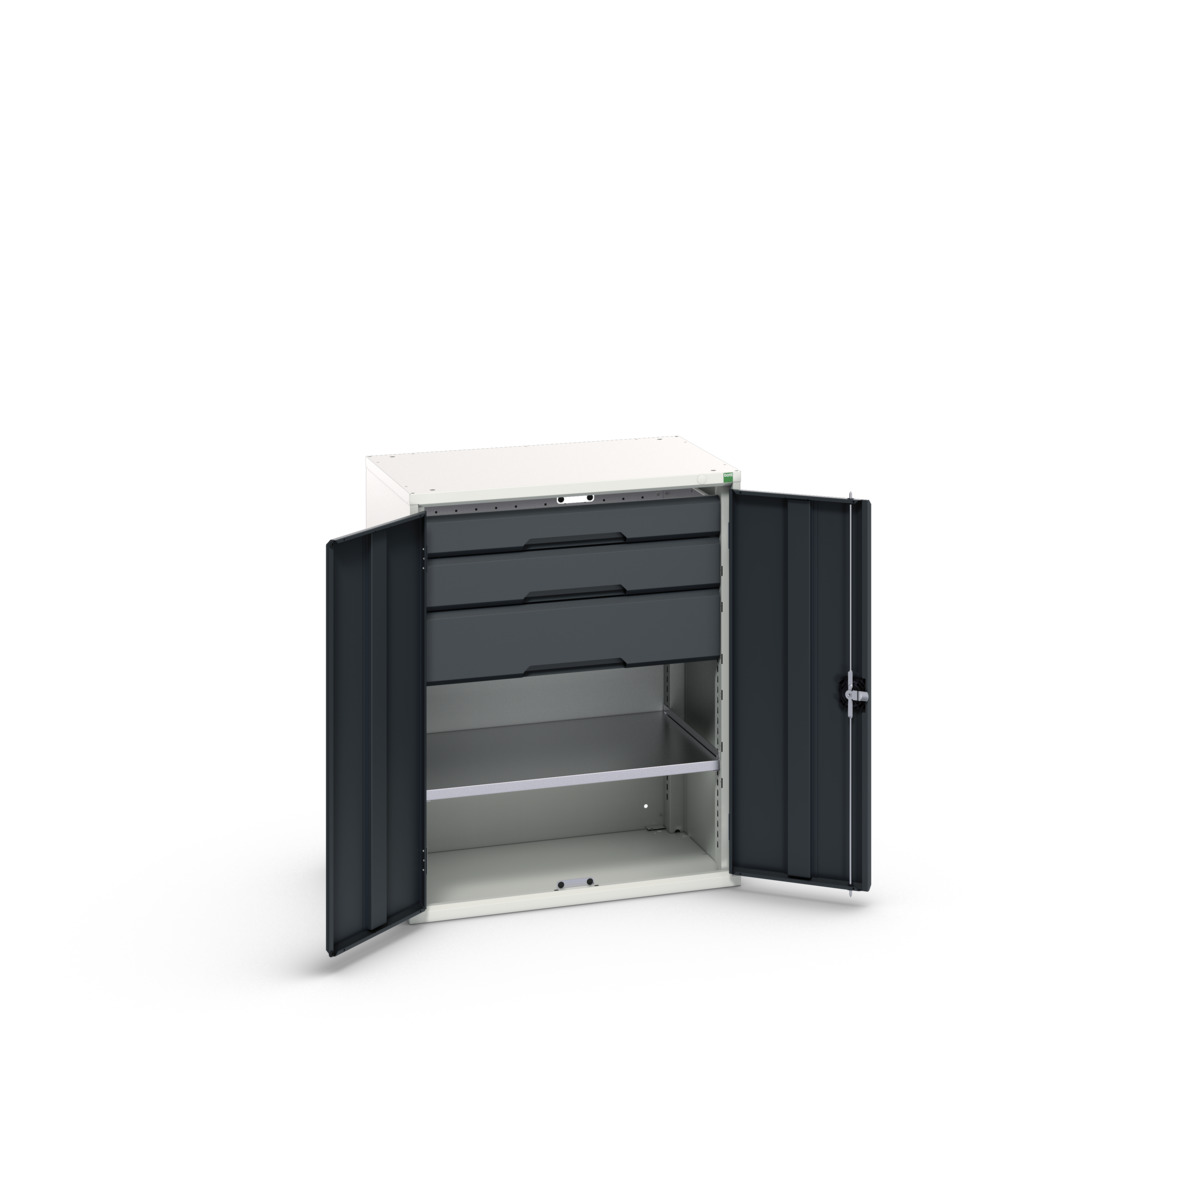 16926454. - verso kitted cupboard